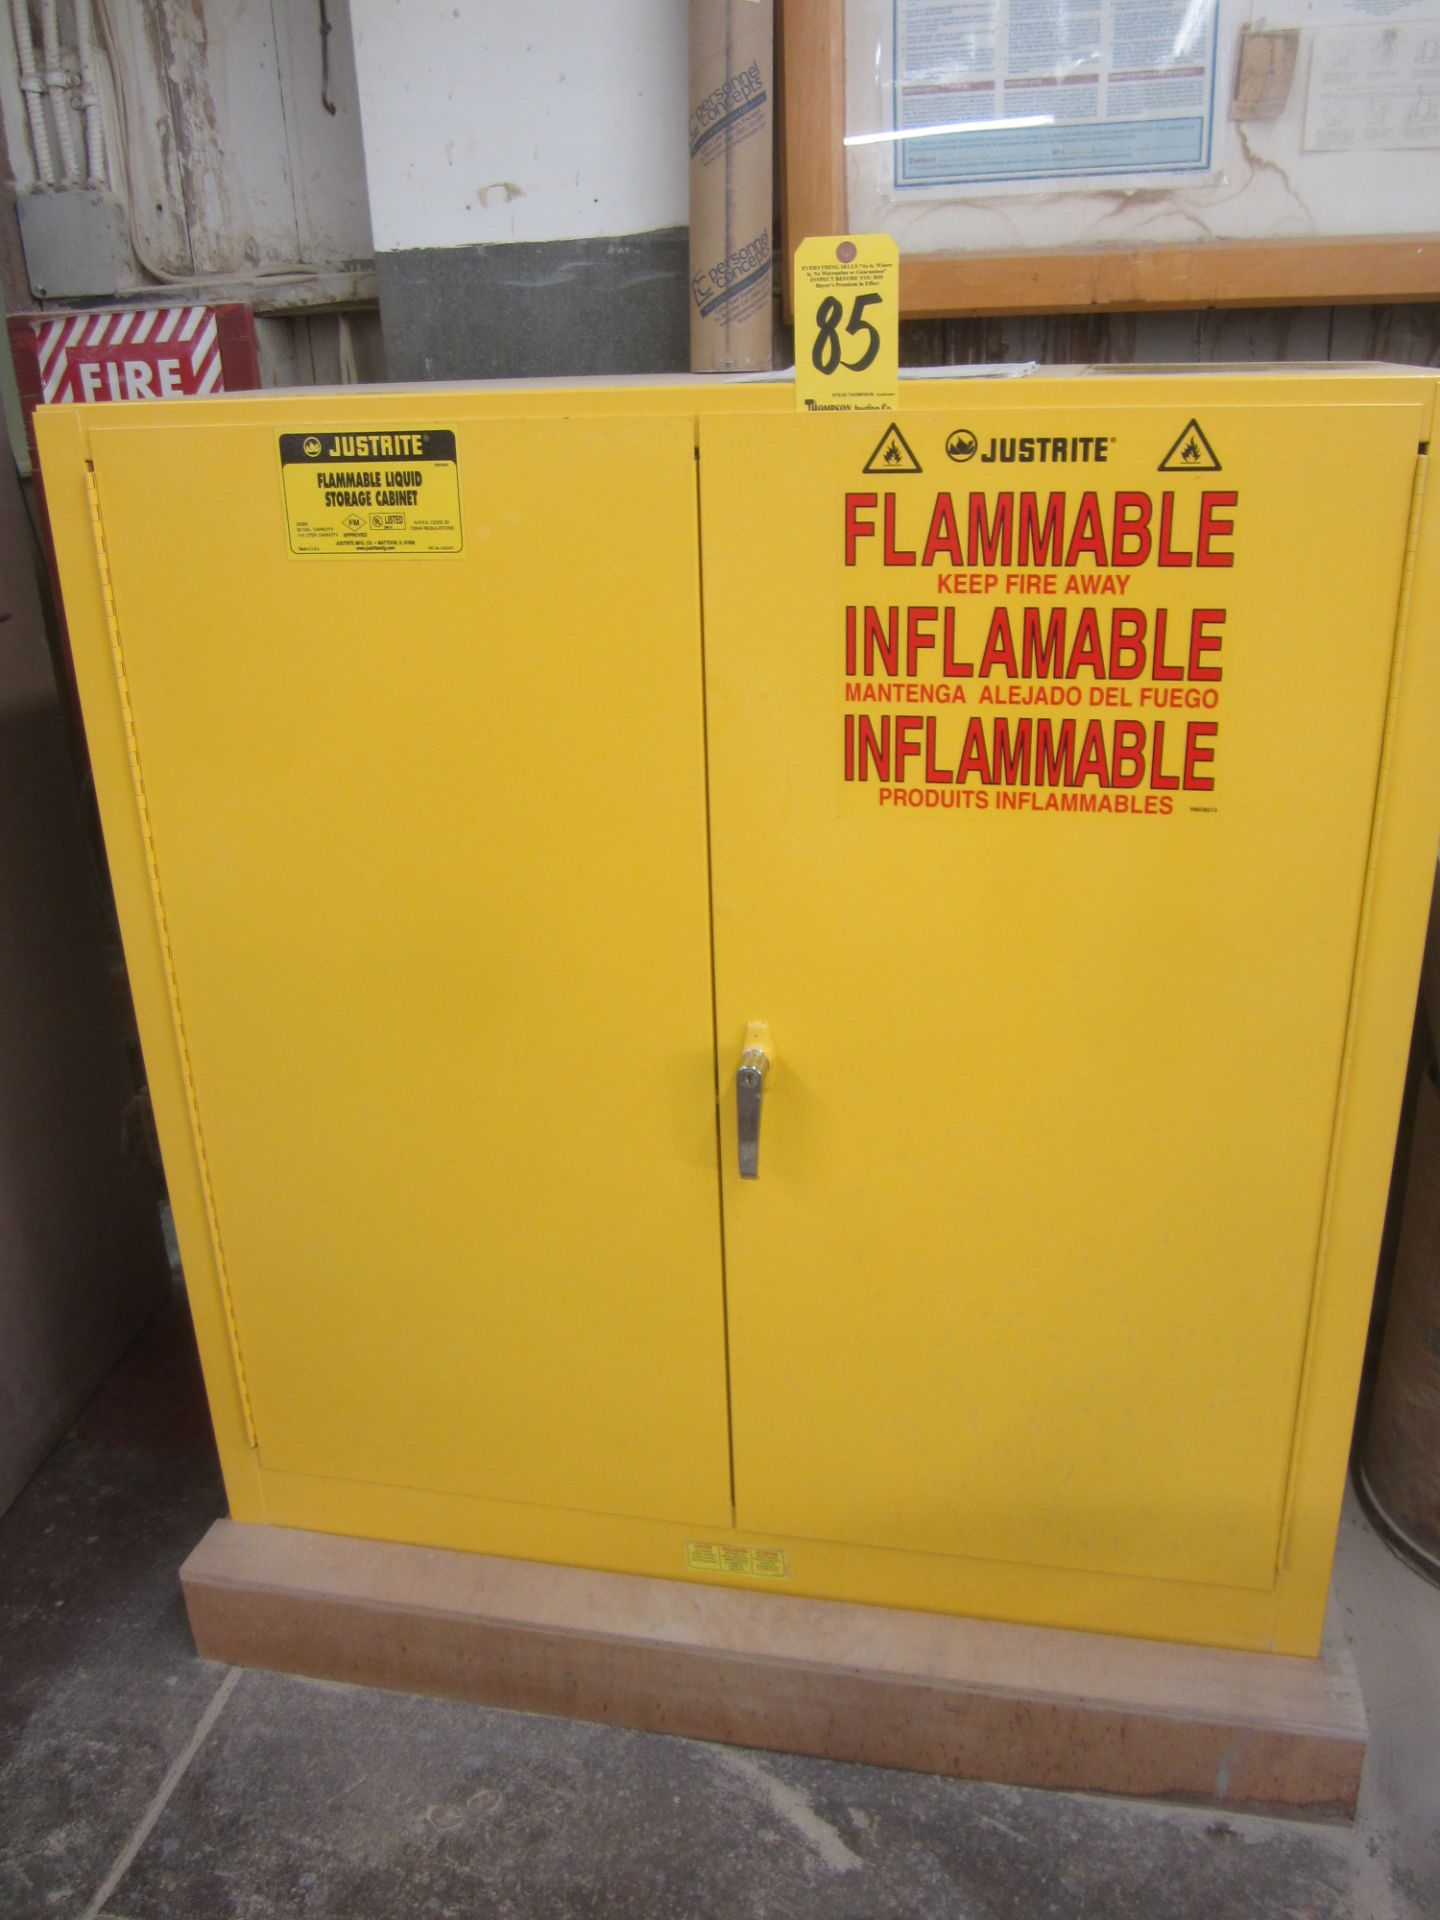 Justrite #25300 Flammable Liquid Storage Cabinet and Contents